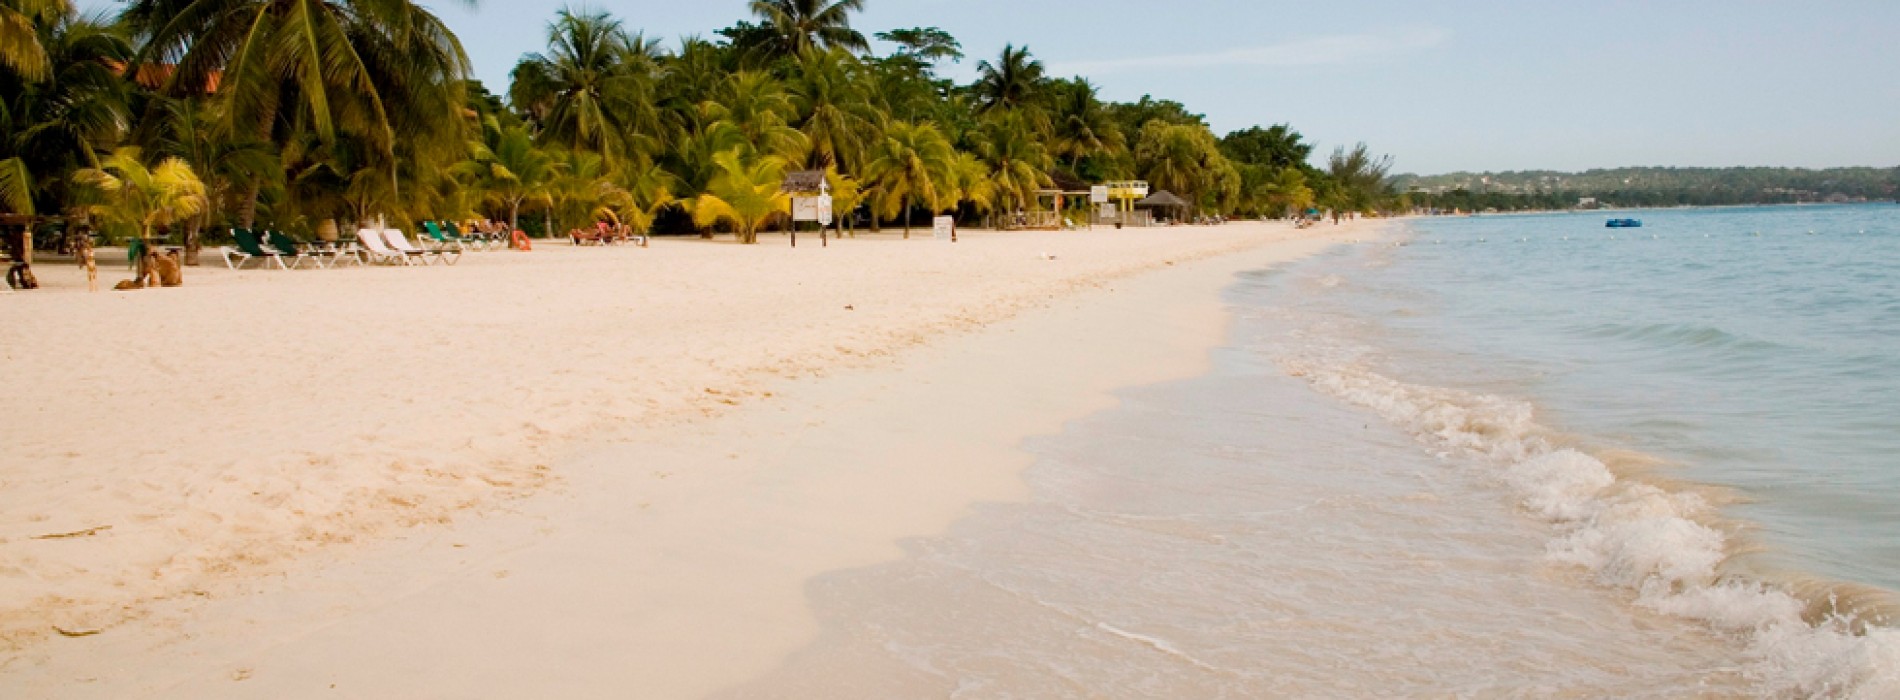 Why should you add Jamaica to your vacation goals?